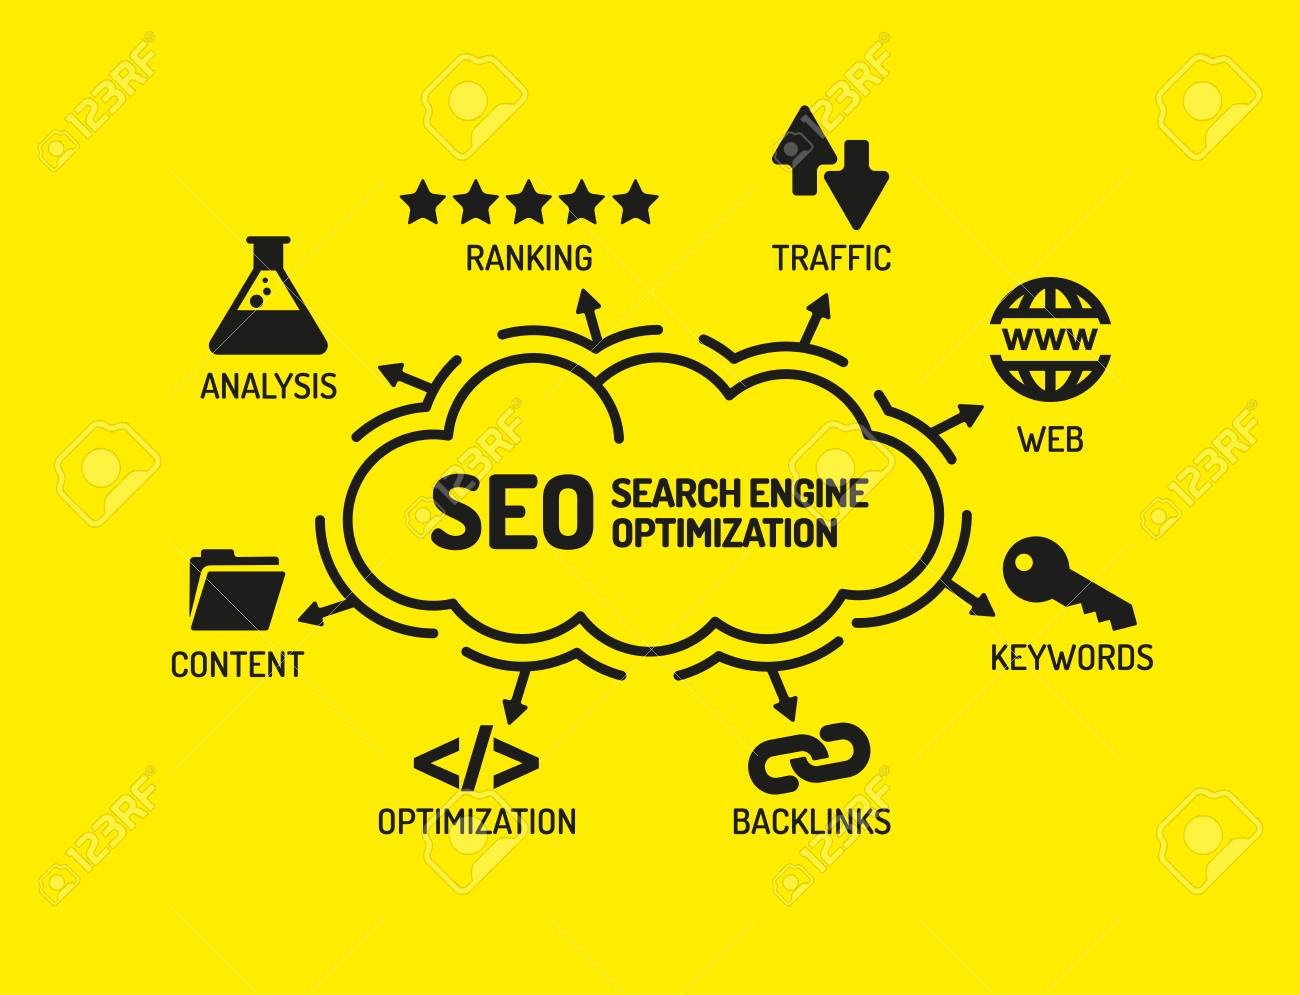 Which Of The Following Is A Benefit Of Search Engine Marketing (SEM)?